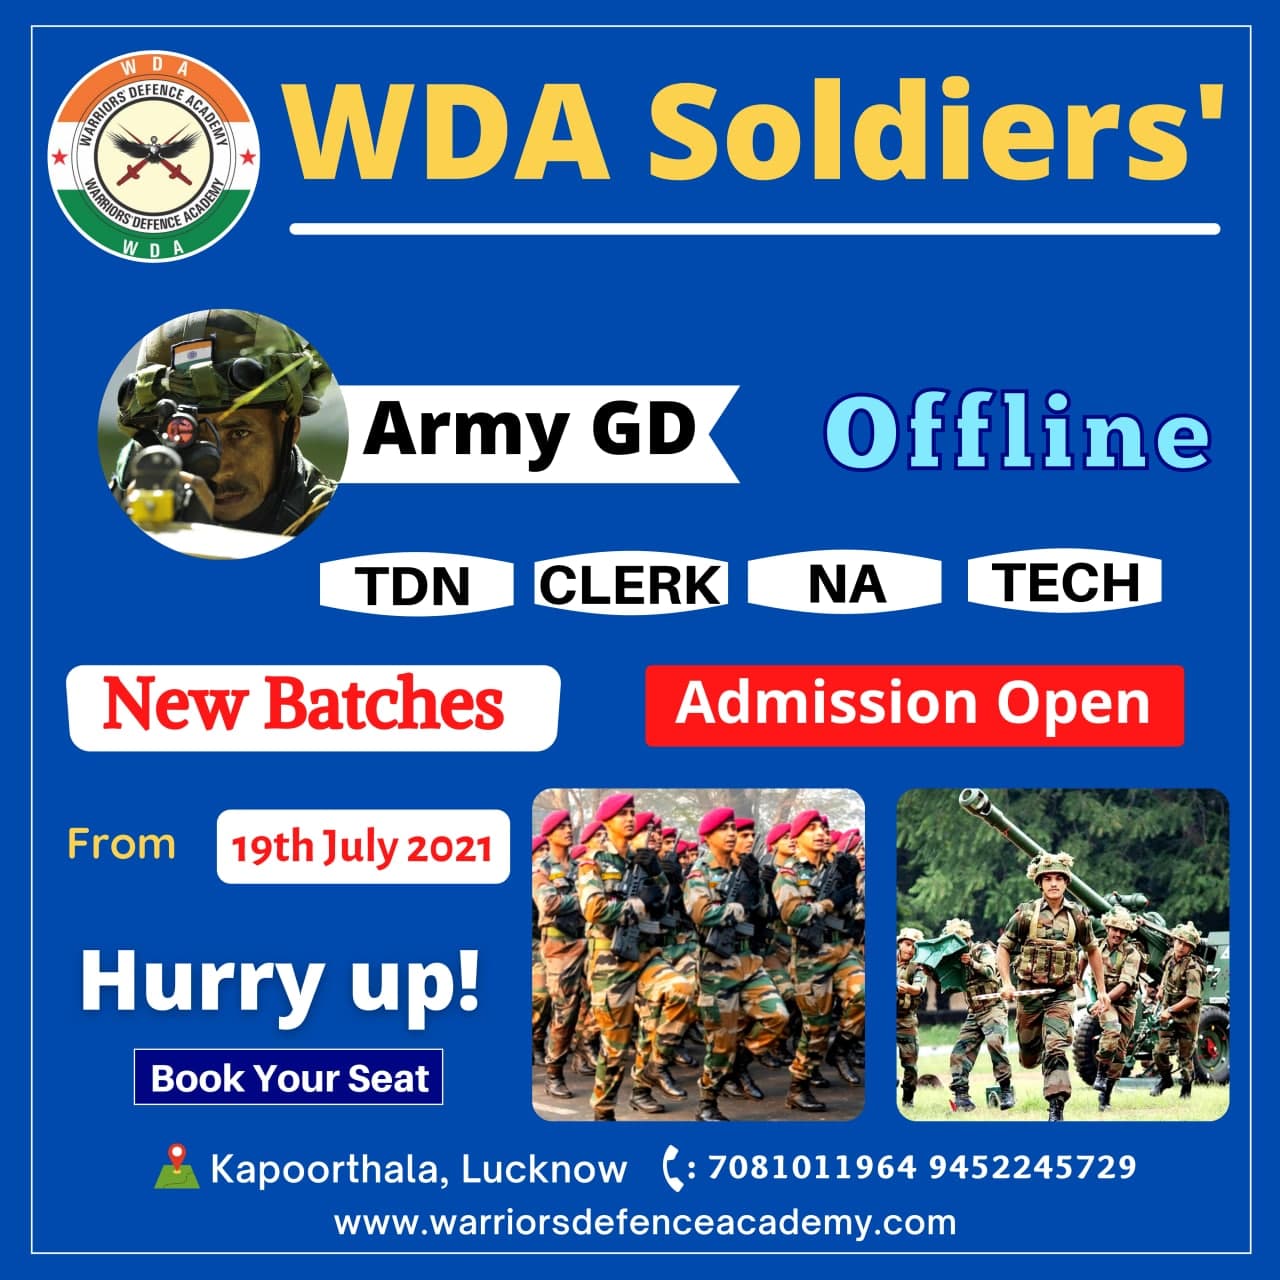 Best Army GD Coaching in Lucknow, India Physical And Written Academy WDA Soldiers Lucknow is Best Army GD Coaching in Lucknow, India other defence exam preparation, We are committed to giving the best result for defence examination. Call: 8881002943 @20% Discount Admission Open Join Now. https://warriorsndaacademy.com/best-army-gd-coaching-lucknow/ https://www.warriorsdefenceacademy.co.in/ Address: E1/5, near Power House, Sector B, Sector CS, Aliganj, Lucknow, Uttar Pradesh 226024 Best Army GD Coaching in Lucknow, India Physical And Written Academy Best Army GD Physical Coaching in Lucknow